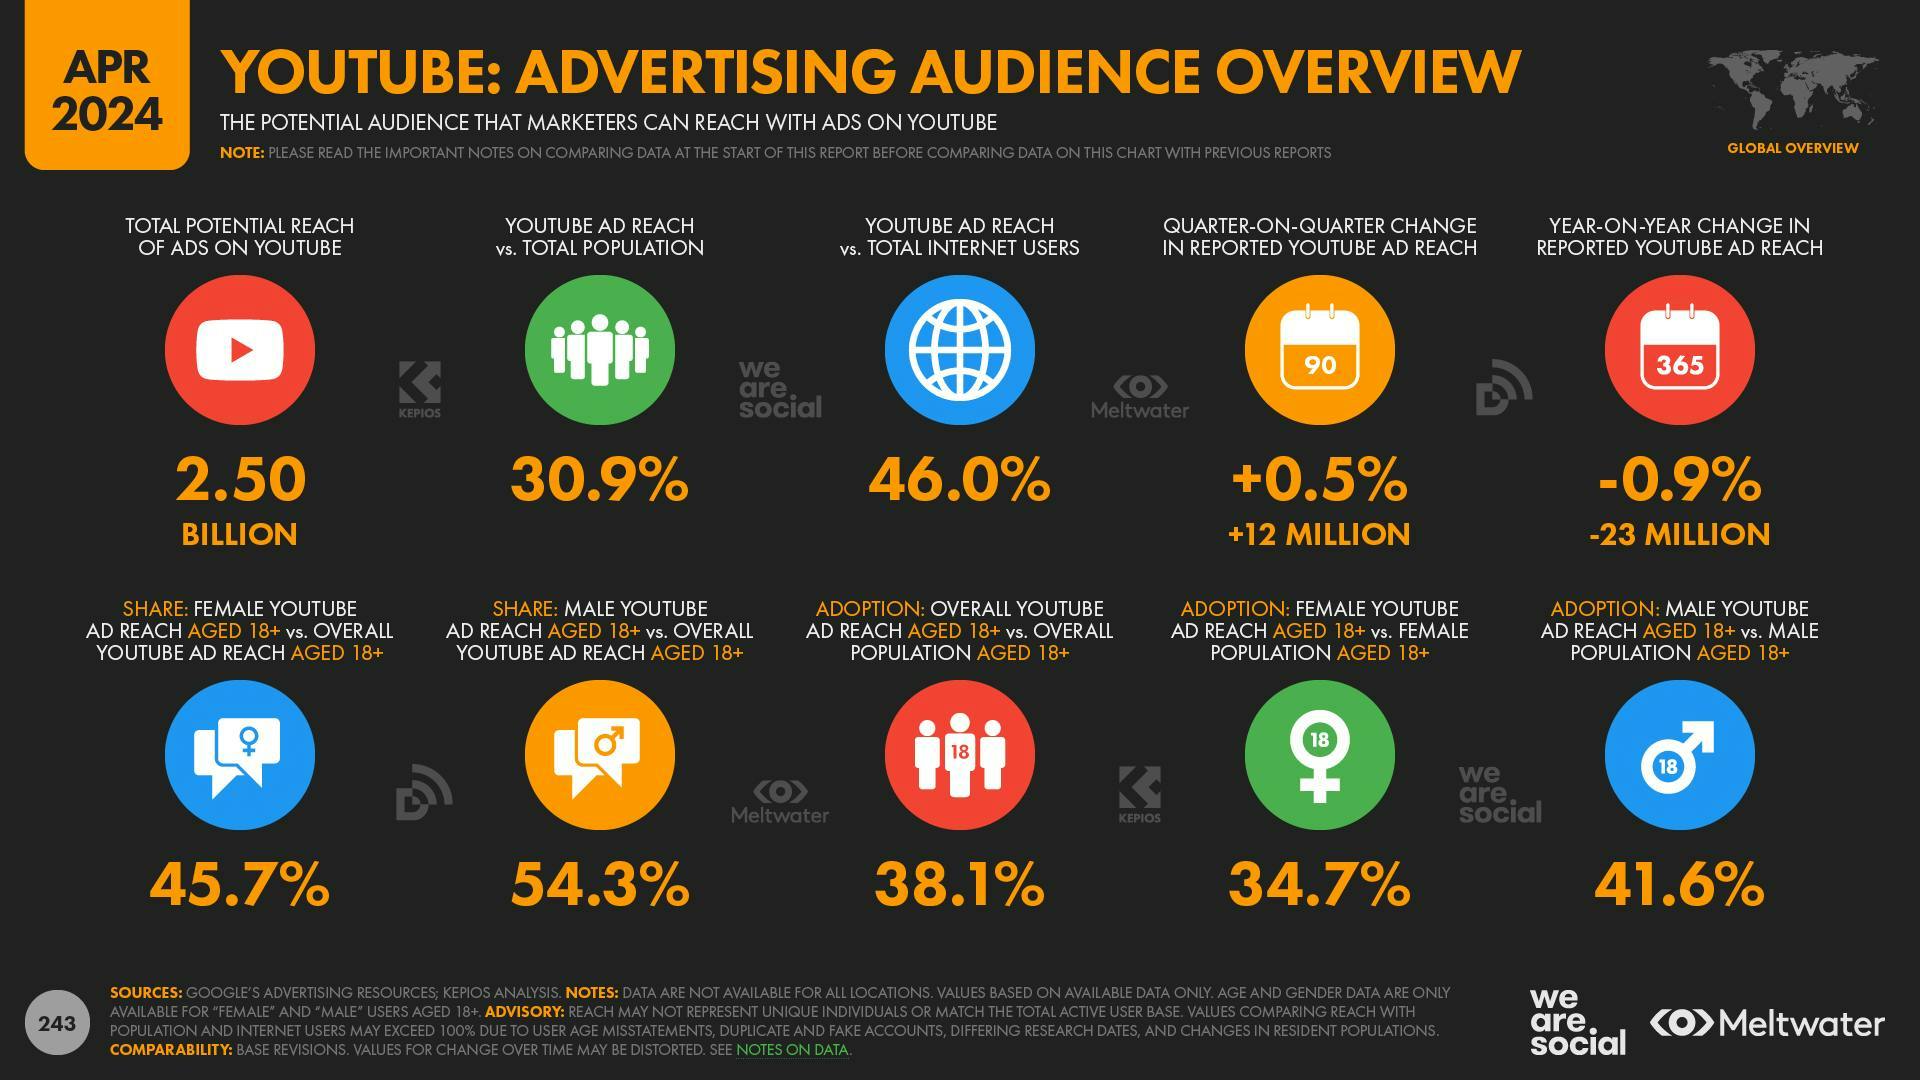 YouTube: Advertising audience overview